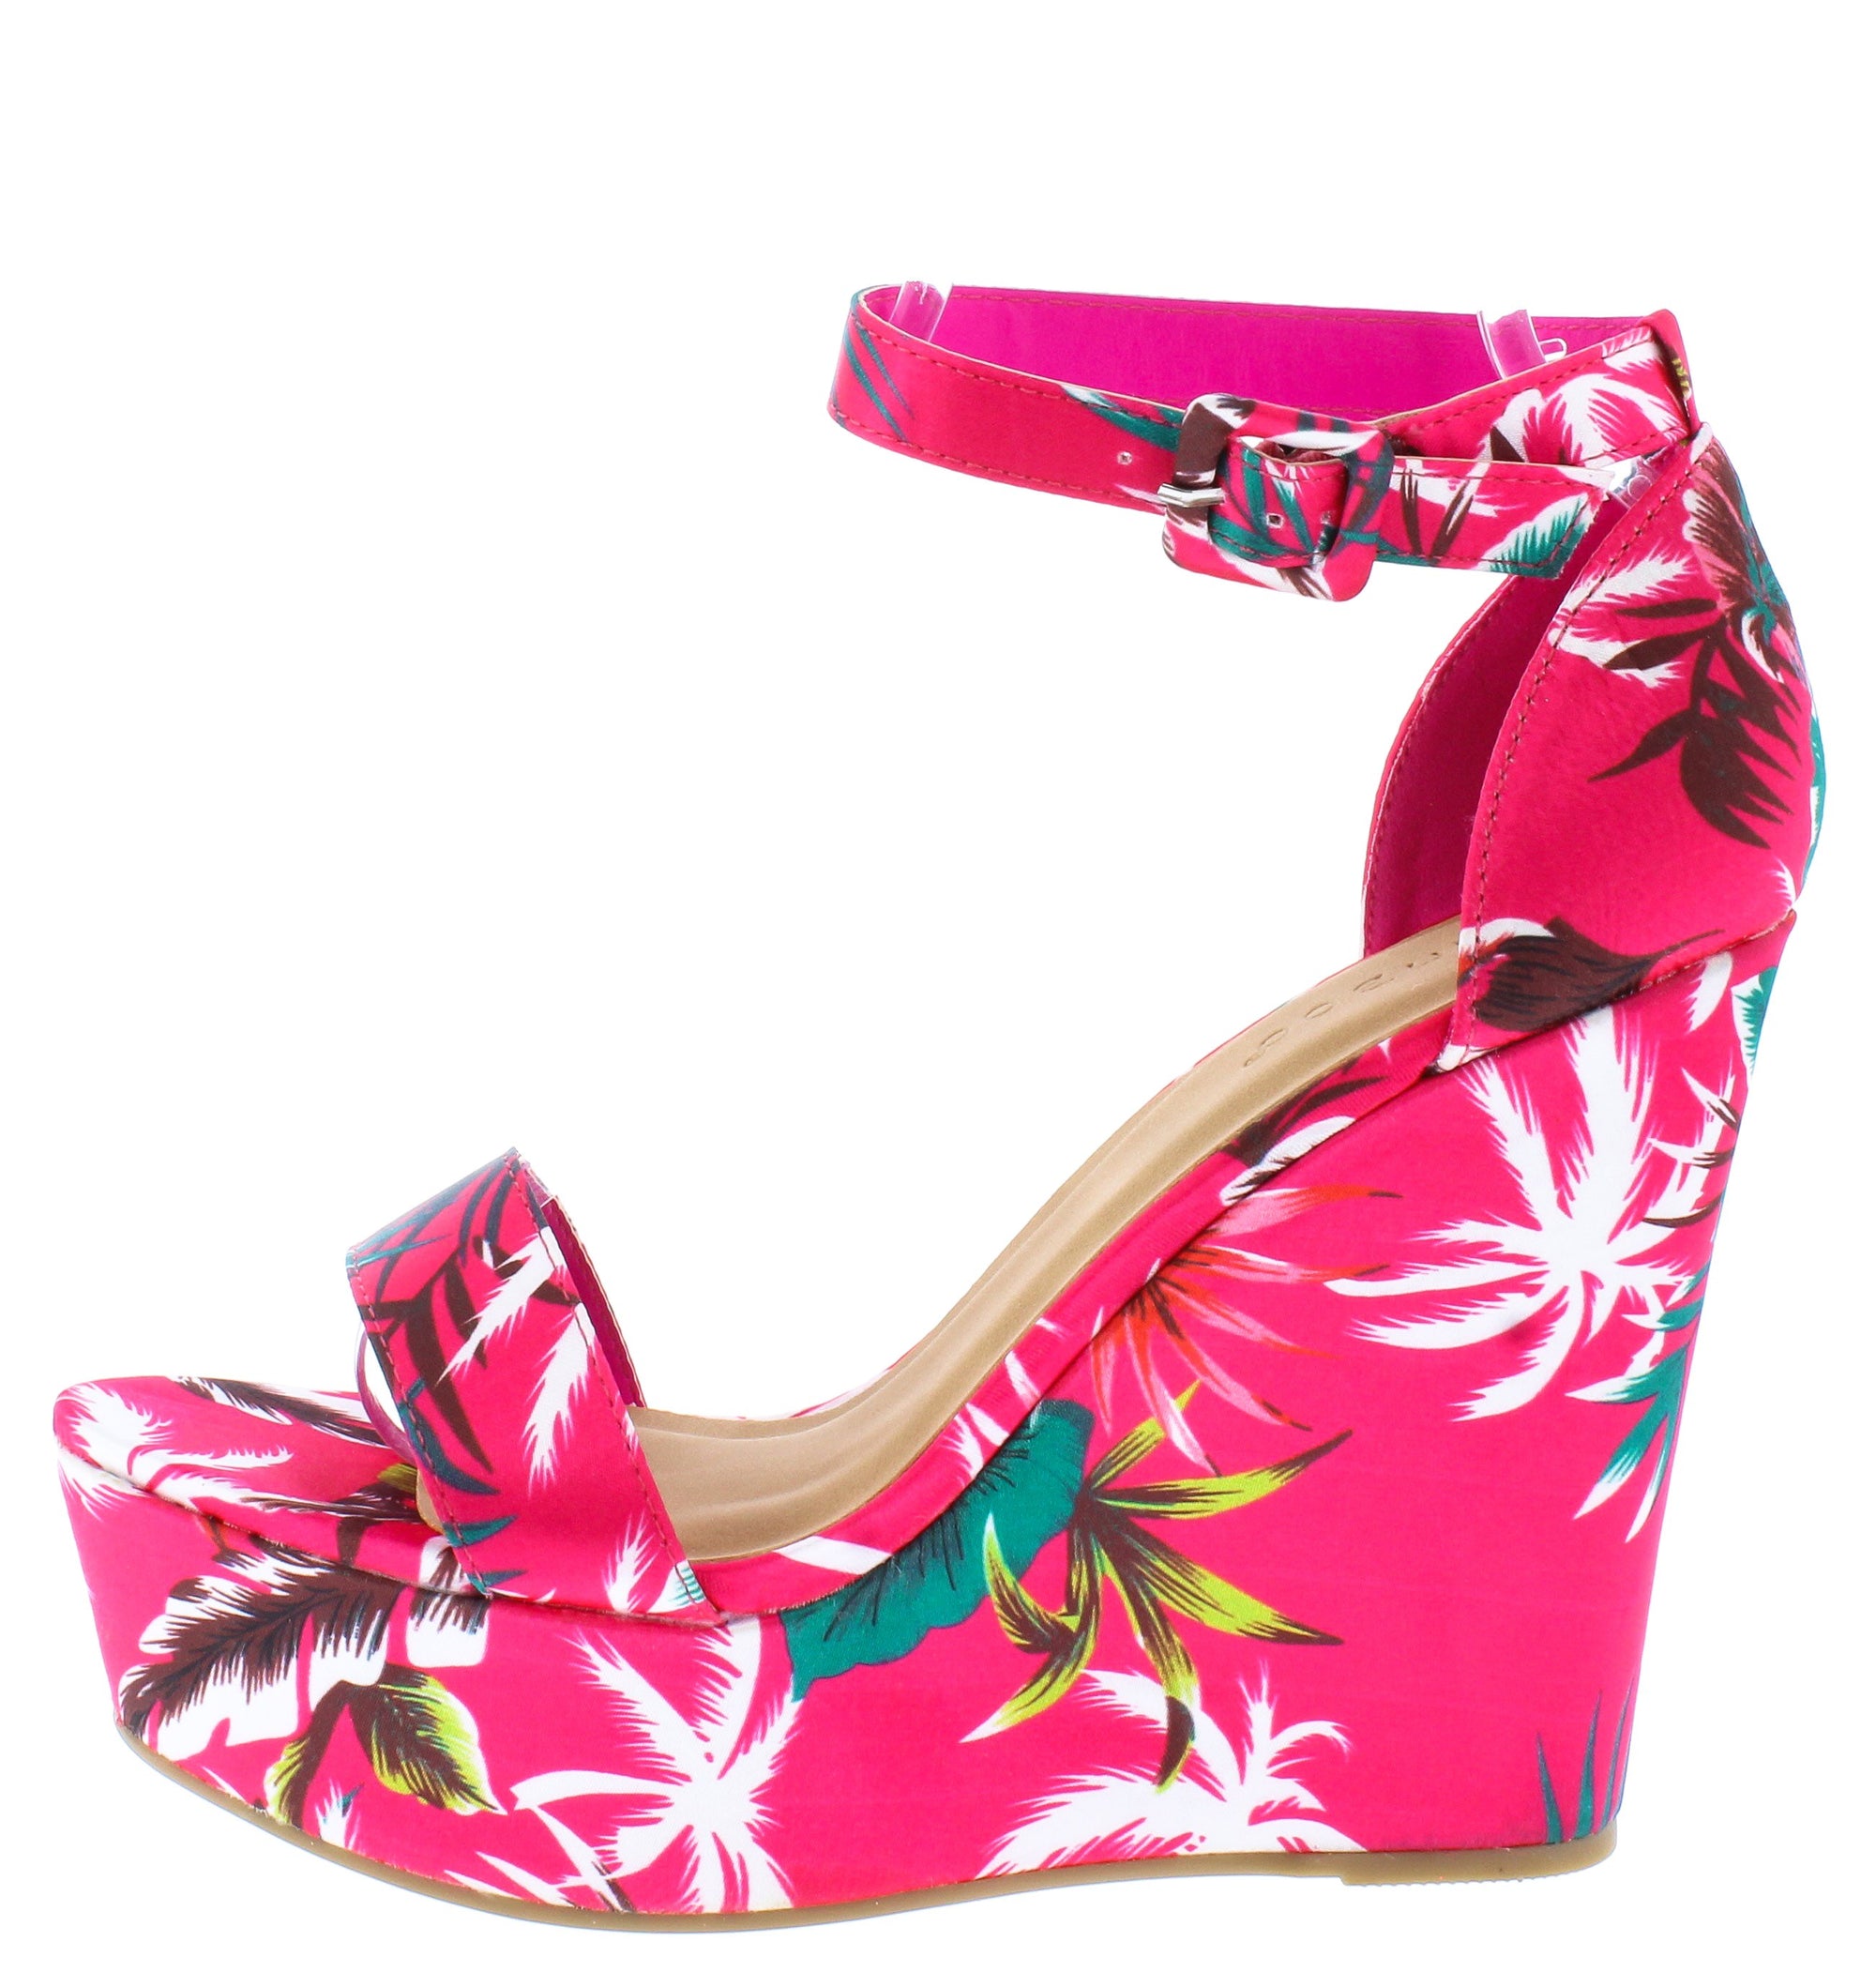 Buy > hot pink wedge shoes > in stock